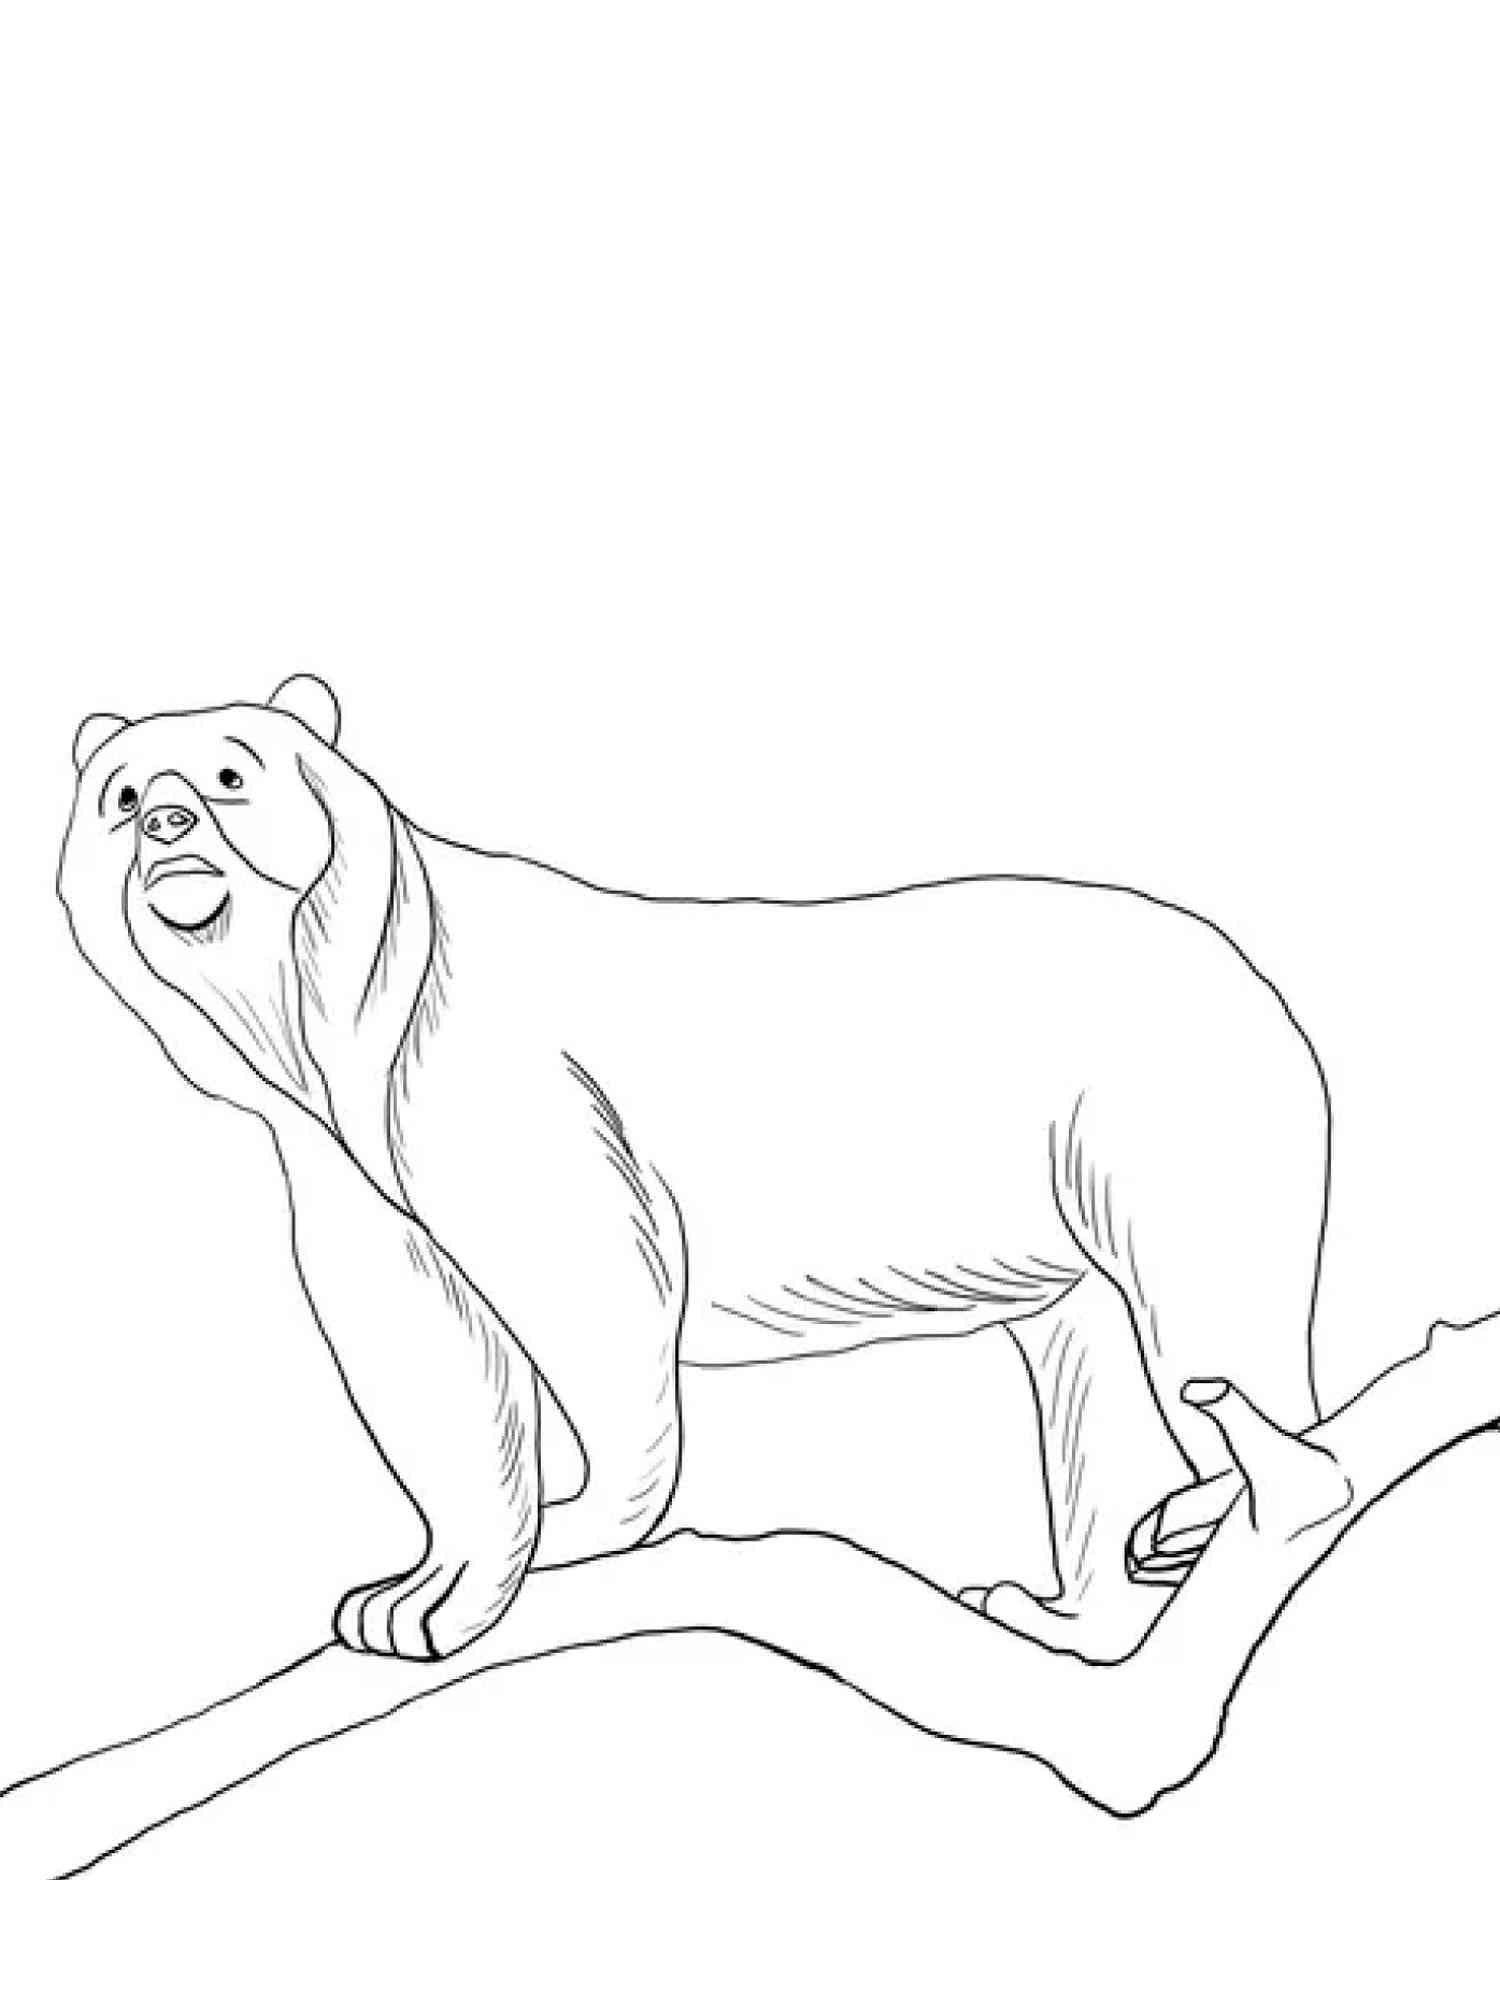 Spectacled Bear on the branch coloring page